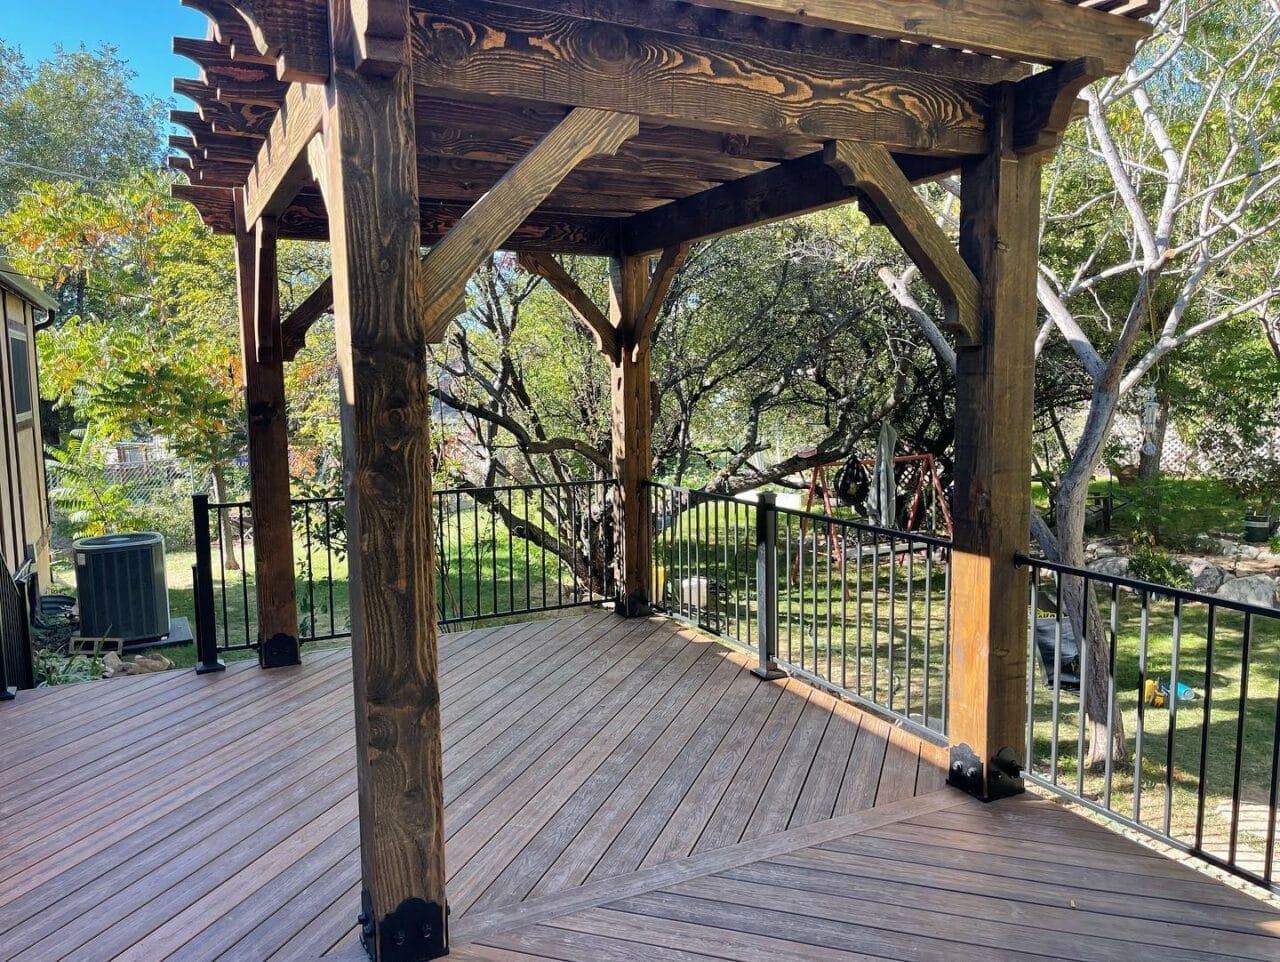 Photo of a traditional wooden pergola